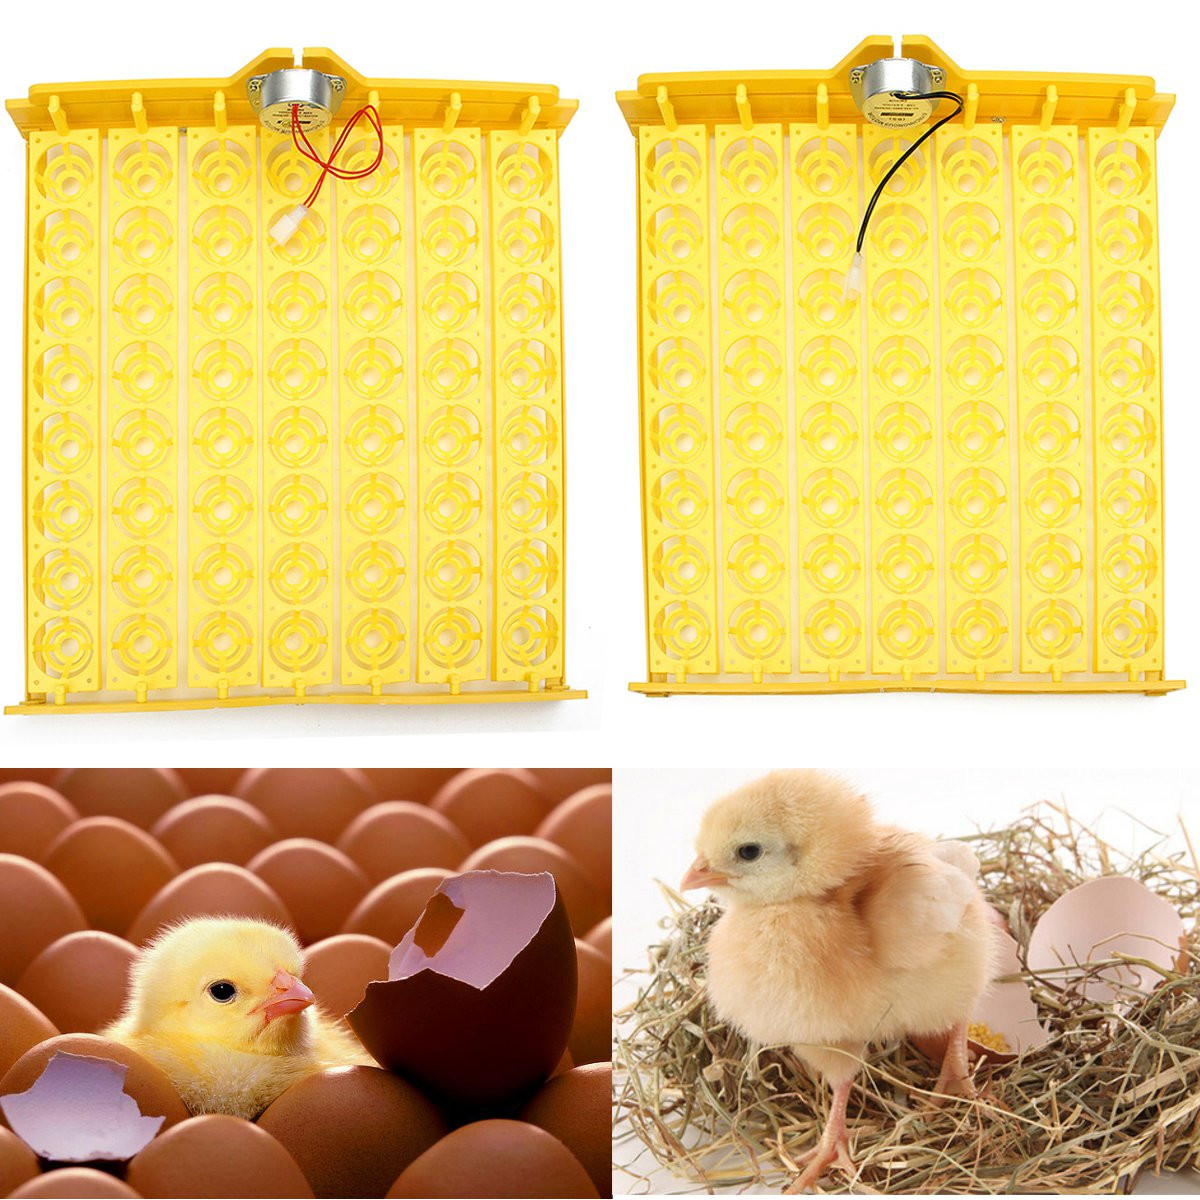 Automatic-Egg-Incubator-56-Eggs-Turner-Tray-Chicken-Quail-Duck-With-110V220V-1633269-2